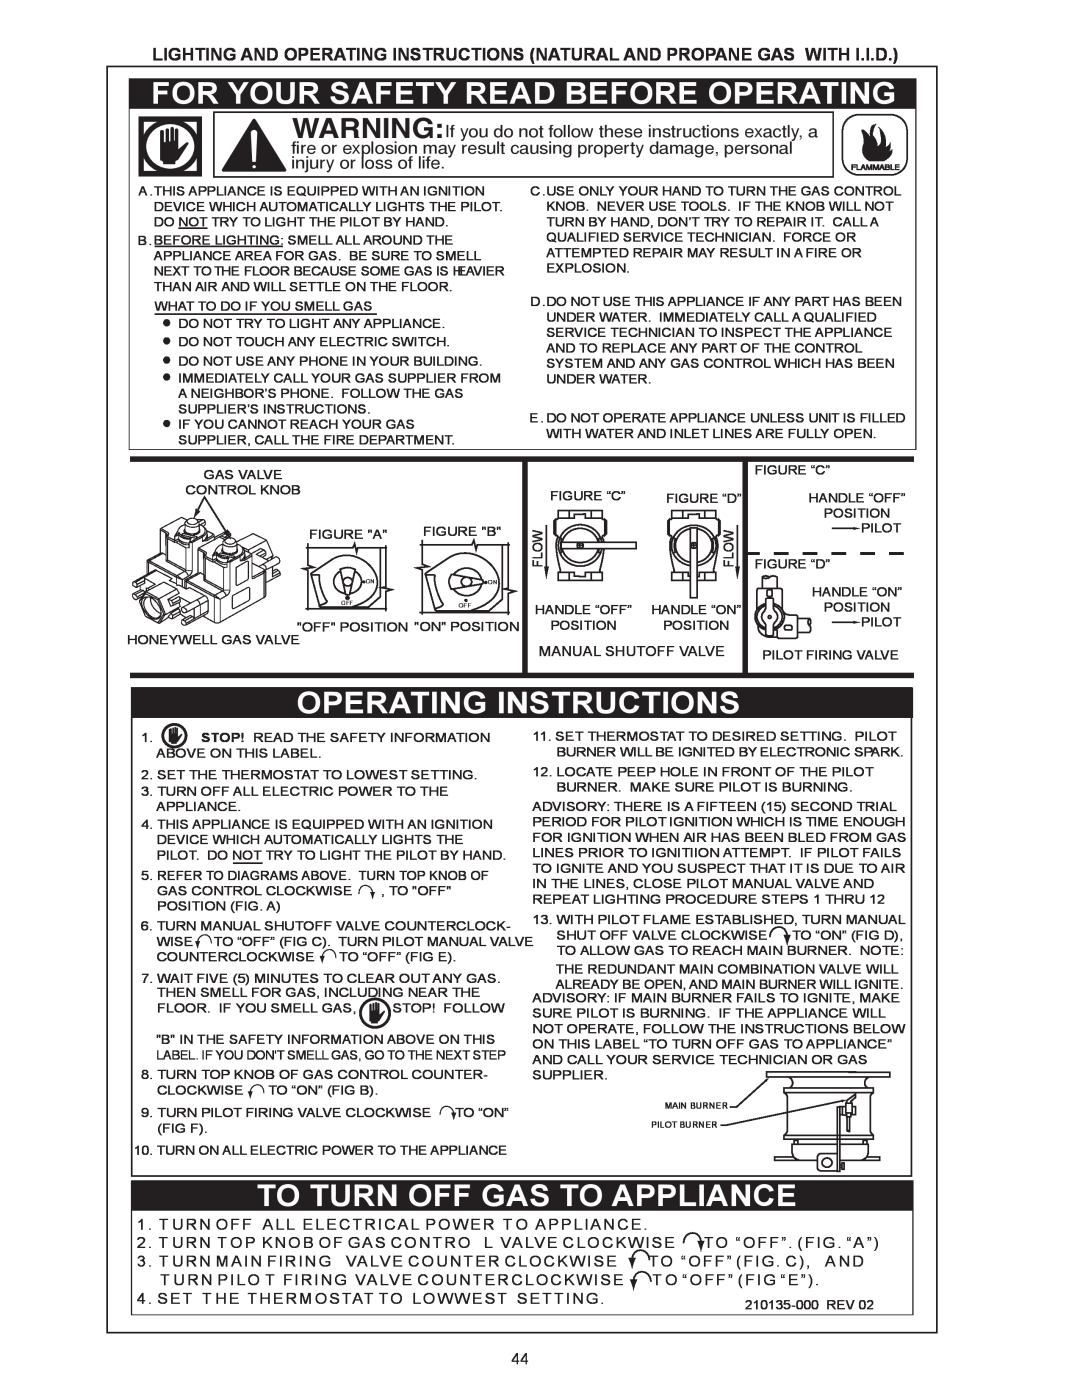 A.O. Smith HW 610 warranty For Your Safety Read Before Operating, Operating Instructions, To Turn Off Gas To Appliance 